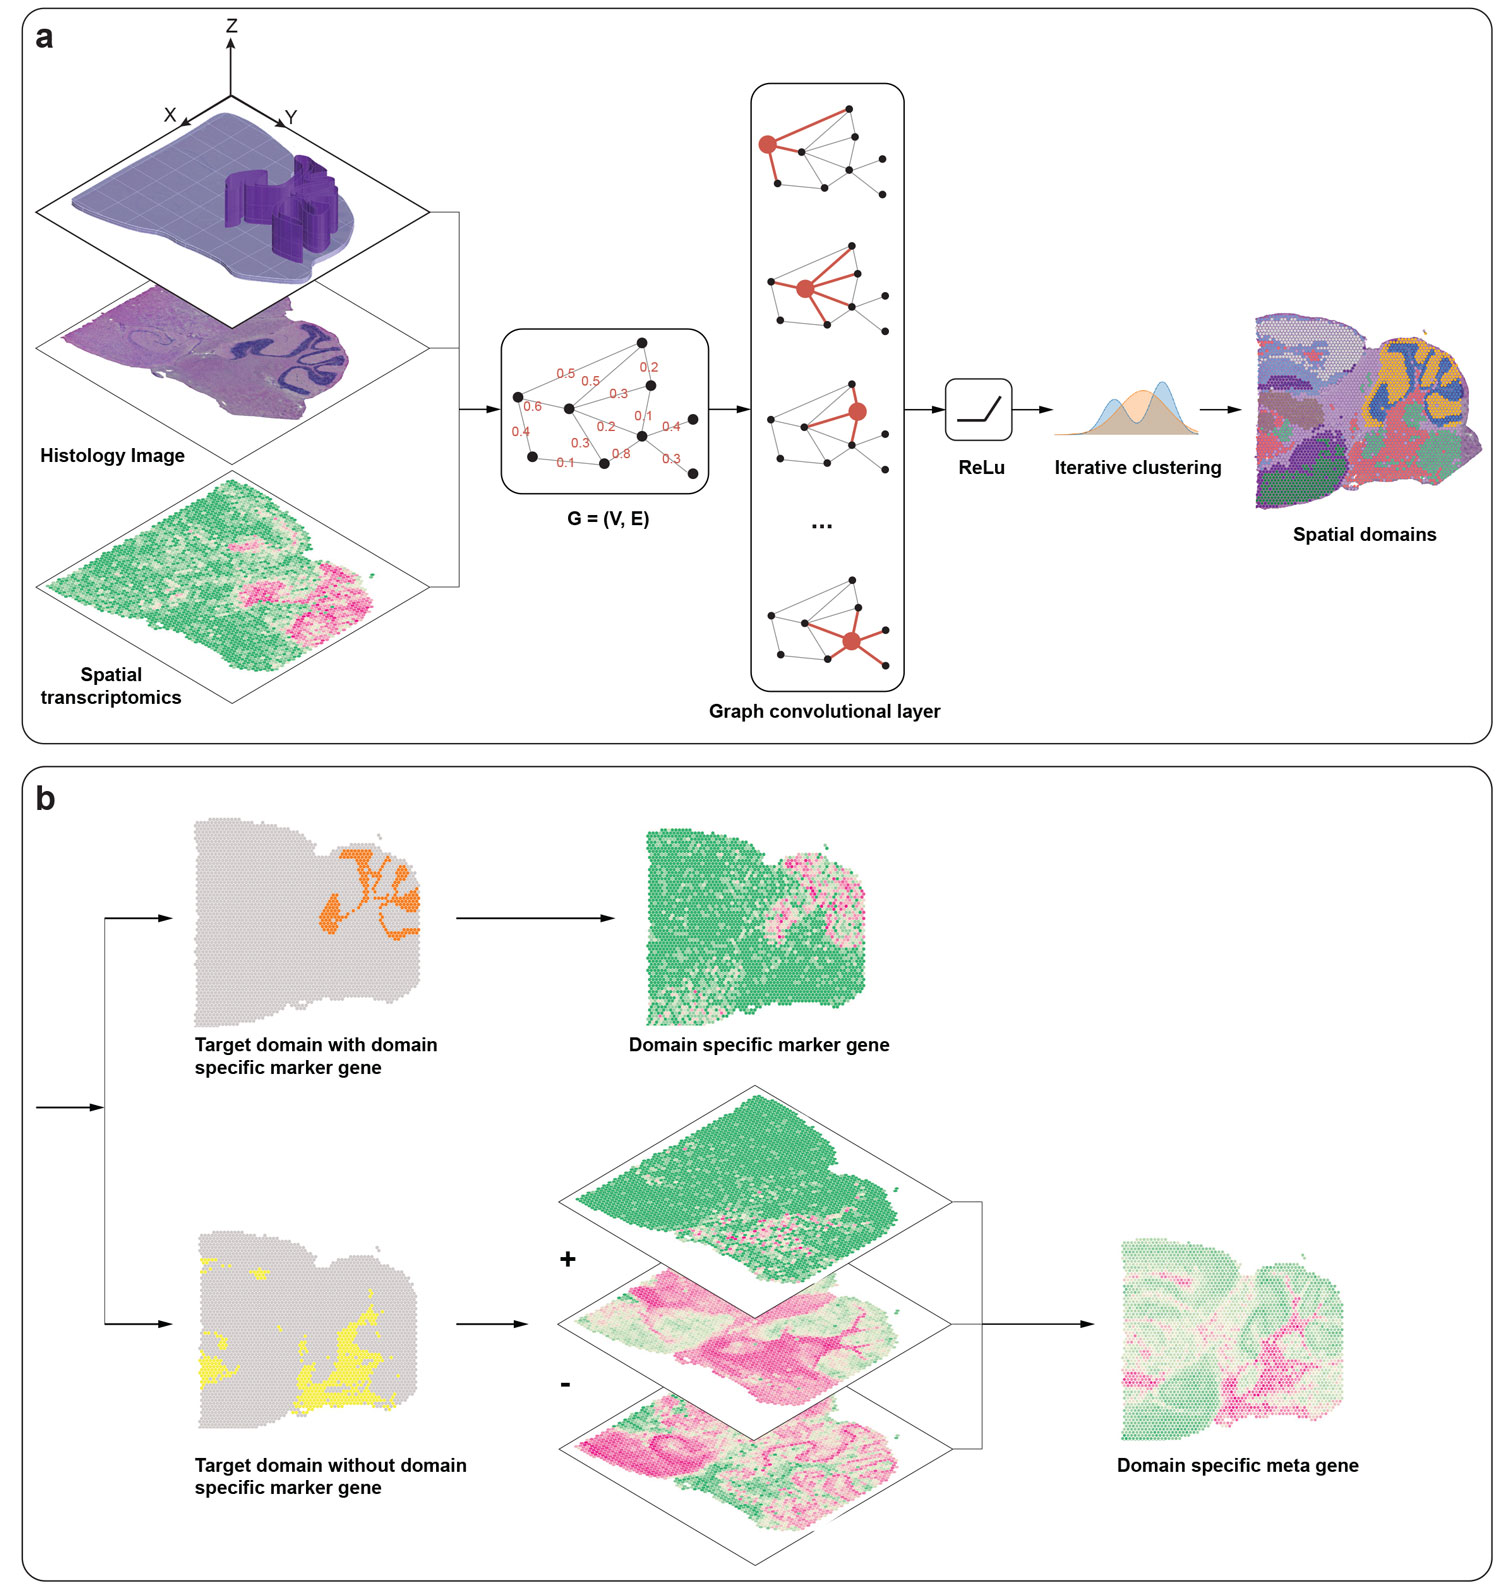 SpaGCN: Integrating gene expression, spatial location and histology to identify spatial domains and spatially variable genes by graph convolutional network